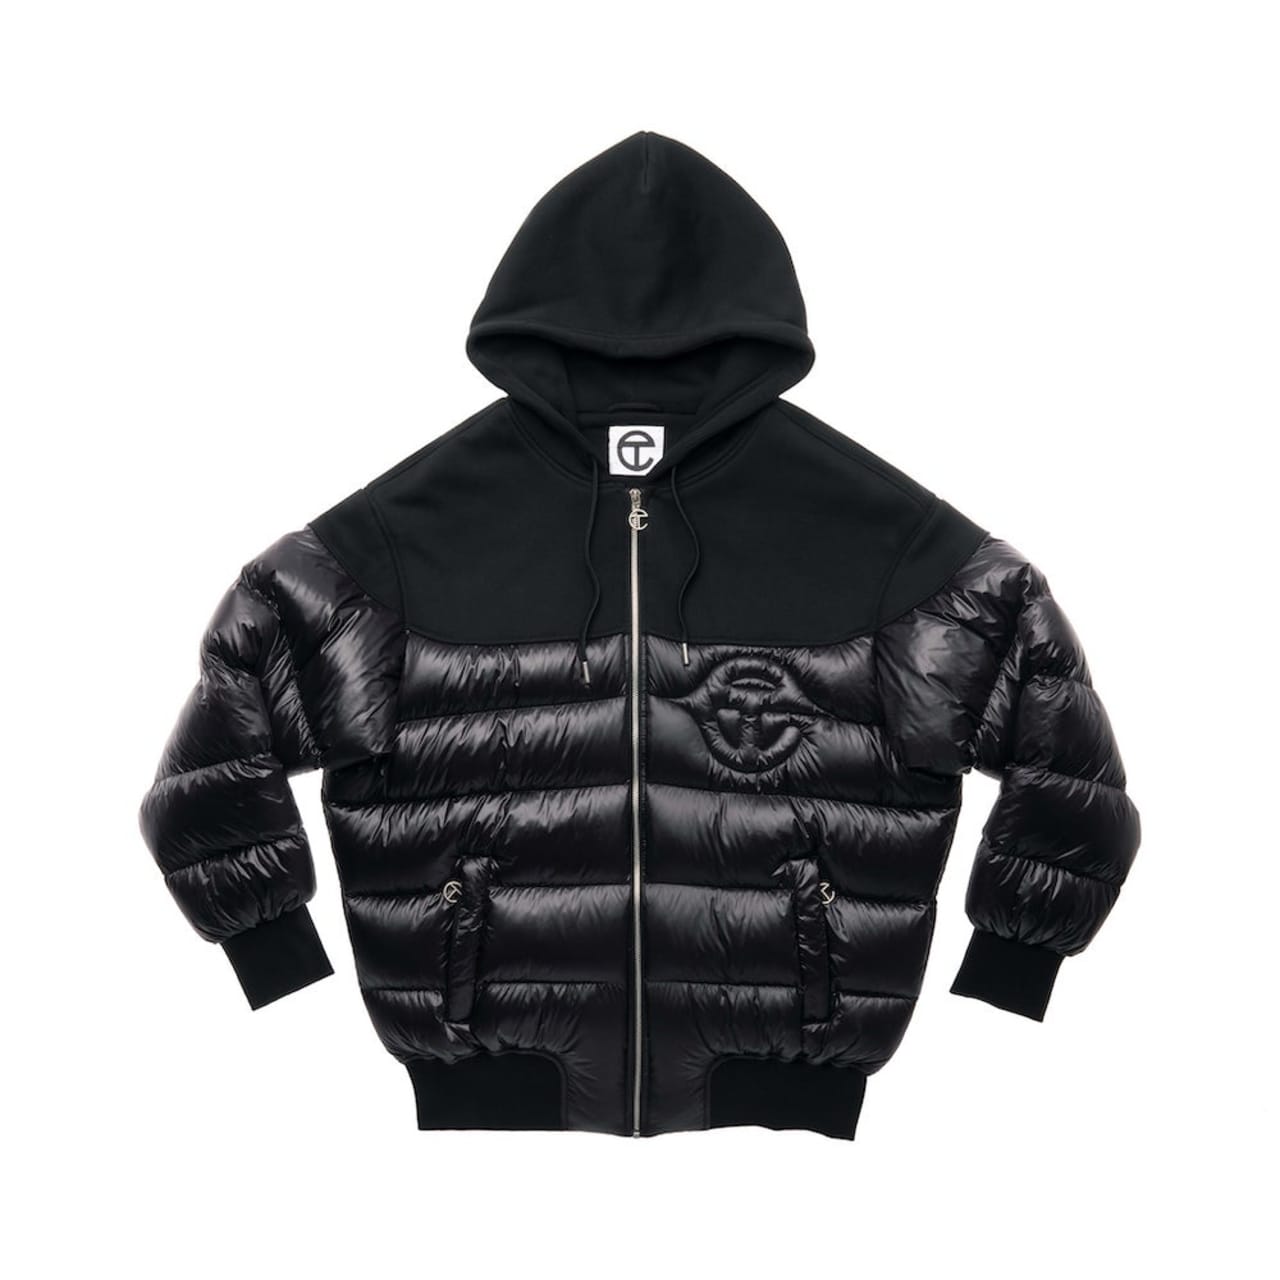 10 Best Down Jackets & Coats To Buy: Yeezy Gap to Moncler 